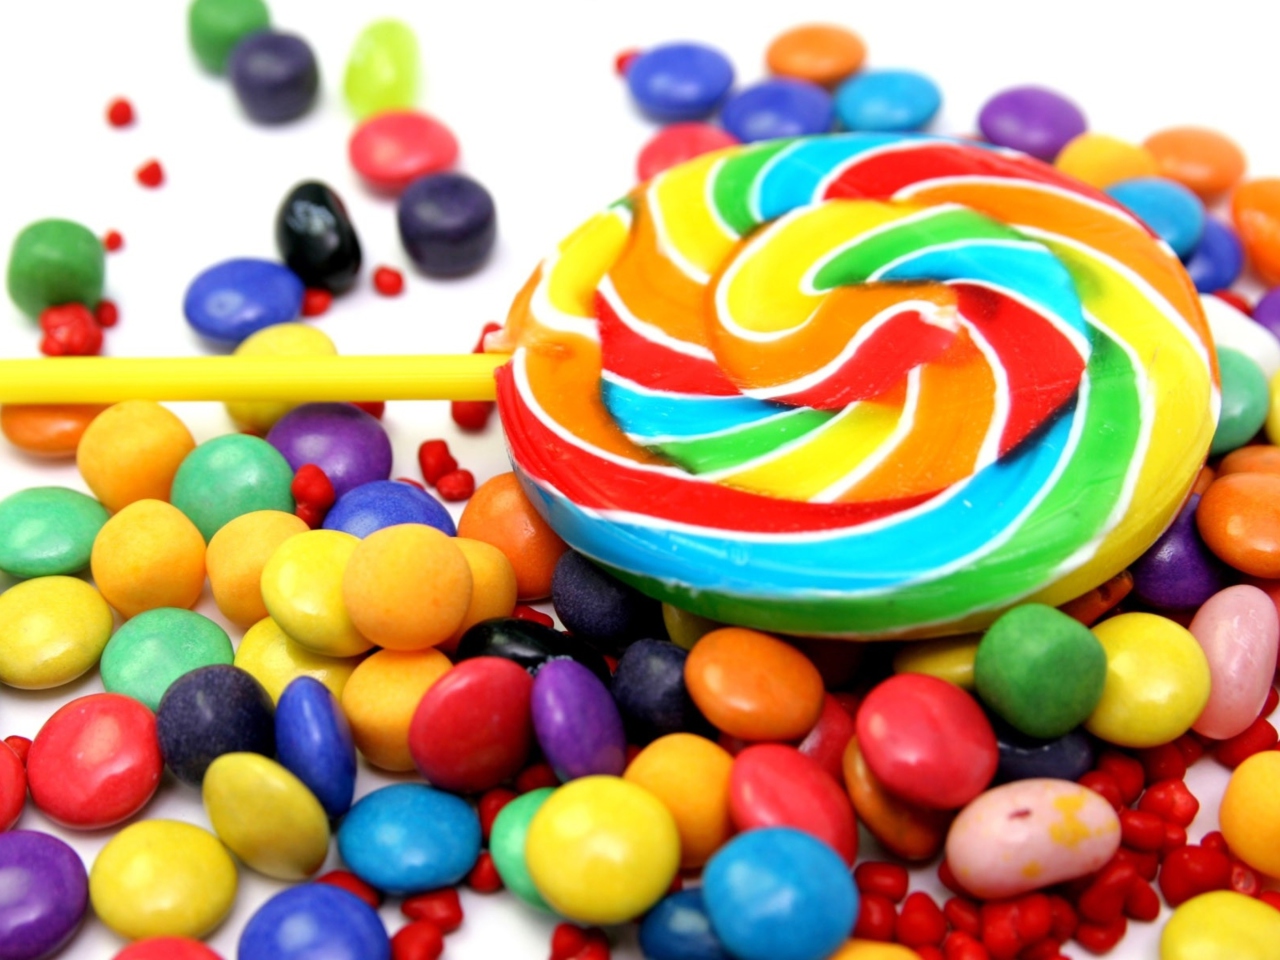 Colorful Candies wallpaper 1280x960